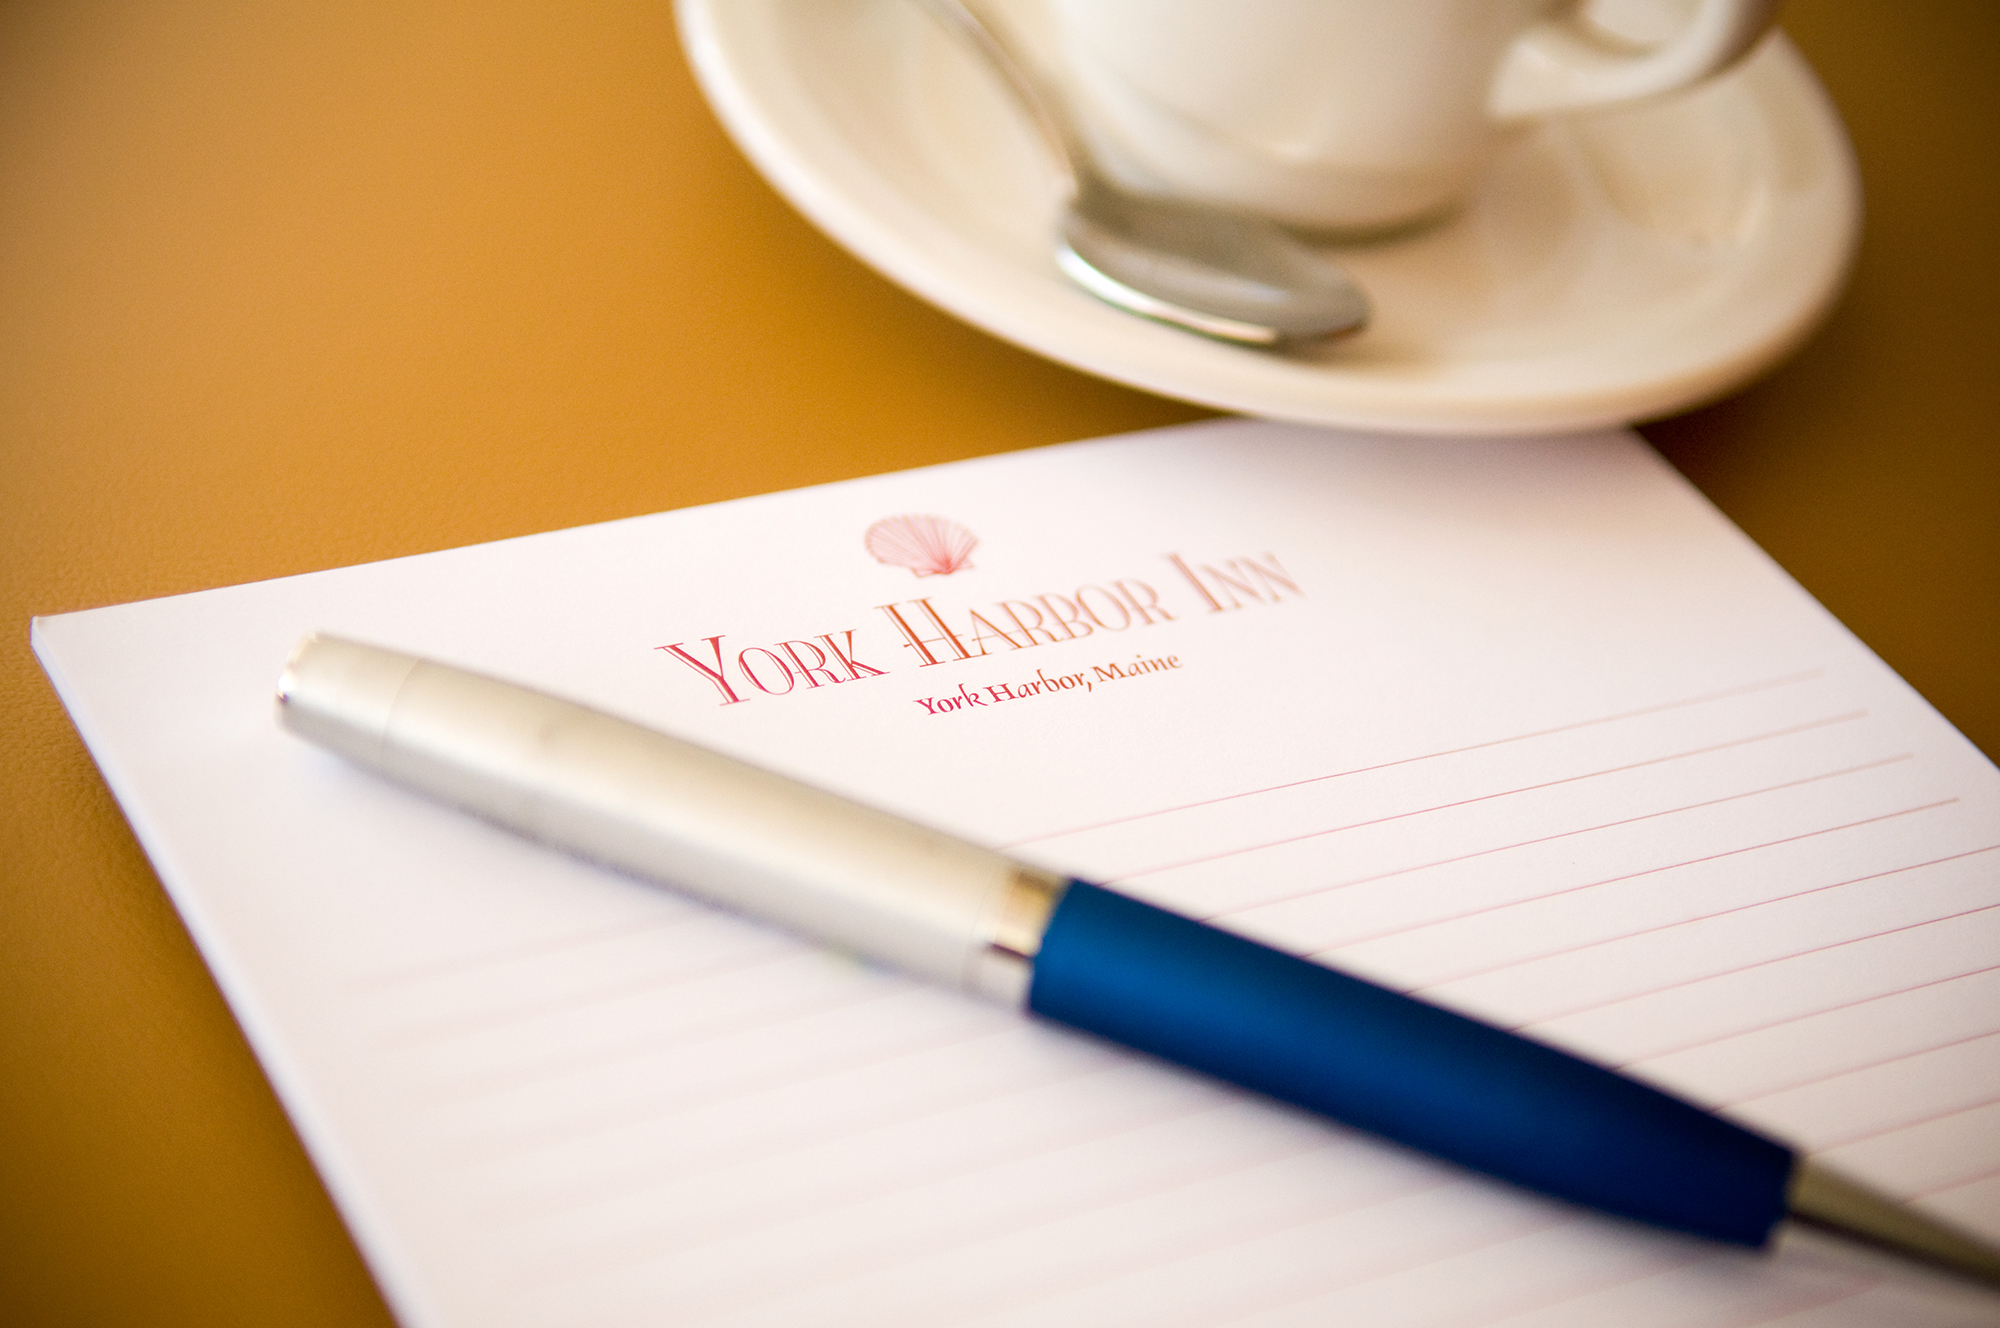 A blue and silver pen lays on top of a lined pad of a paper with a red logo on top of the paper. A coffee cup, saucer, and spoon sit in the background.